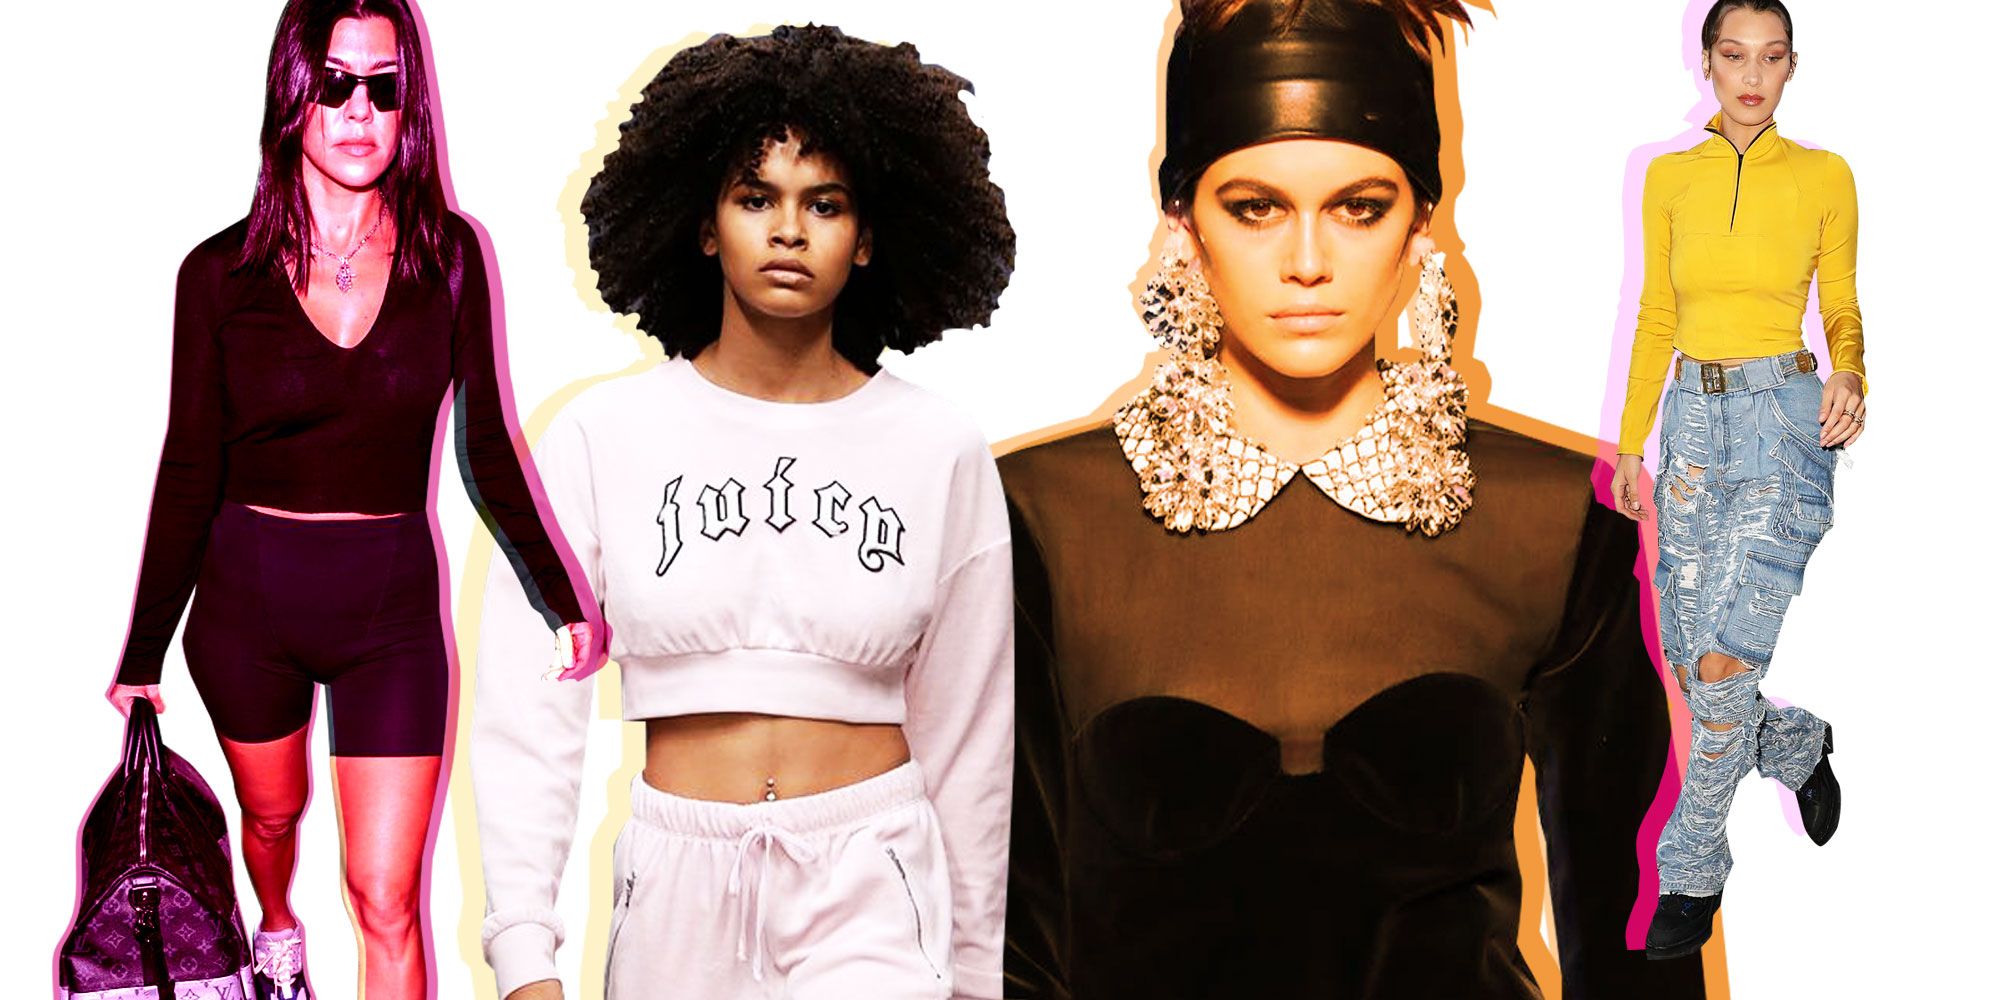 30 '80s Fashion Trends Making a Comeback - Nostalgic '80s Trends Now